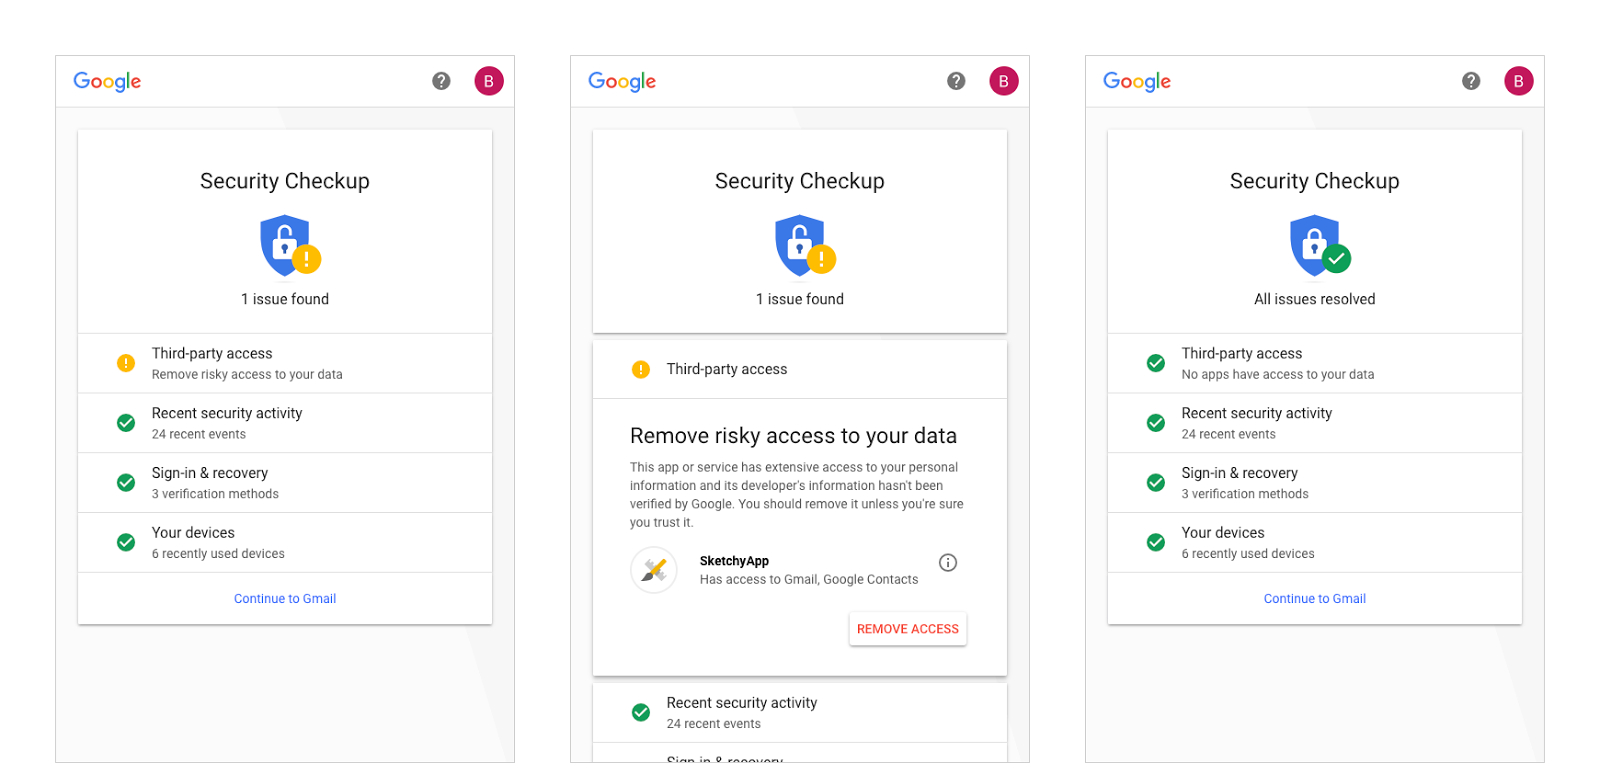 Google revamps its Security Checkup feature with personalized suggestions for your account | TechCrunch